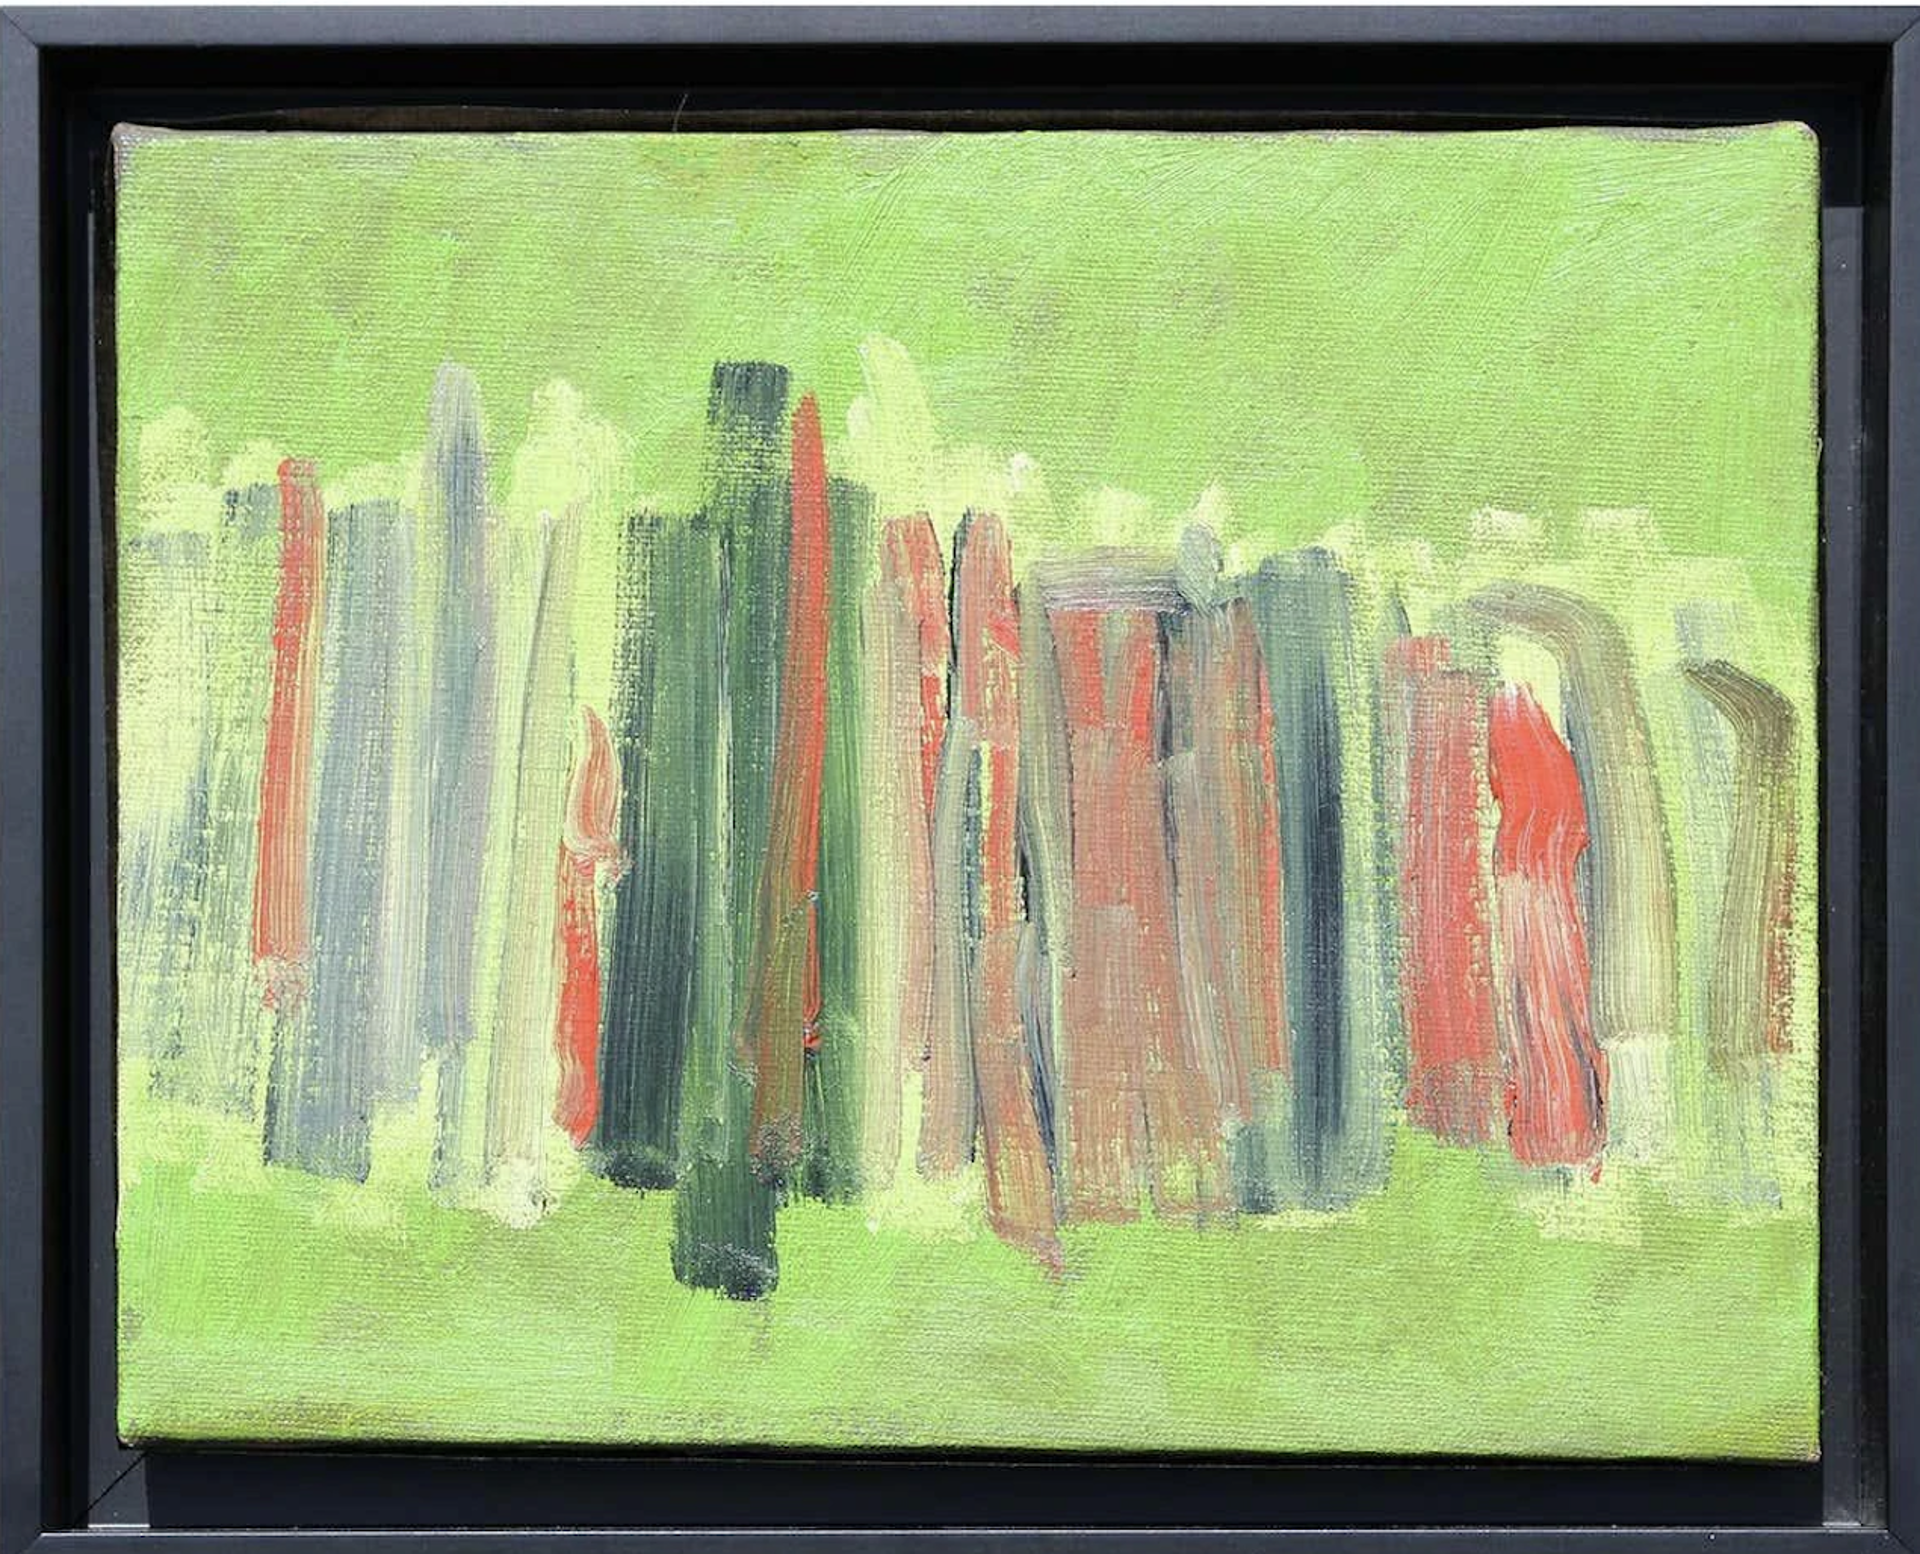 Untitled (stripes on green) by McKie Trotter